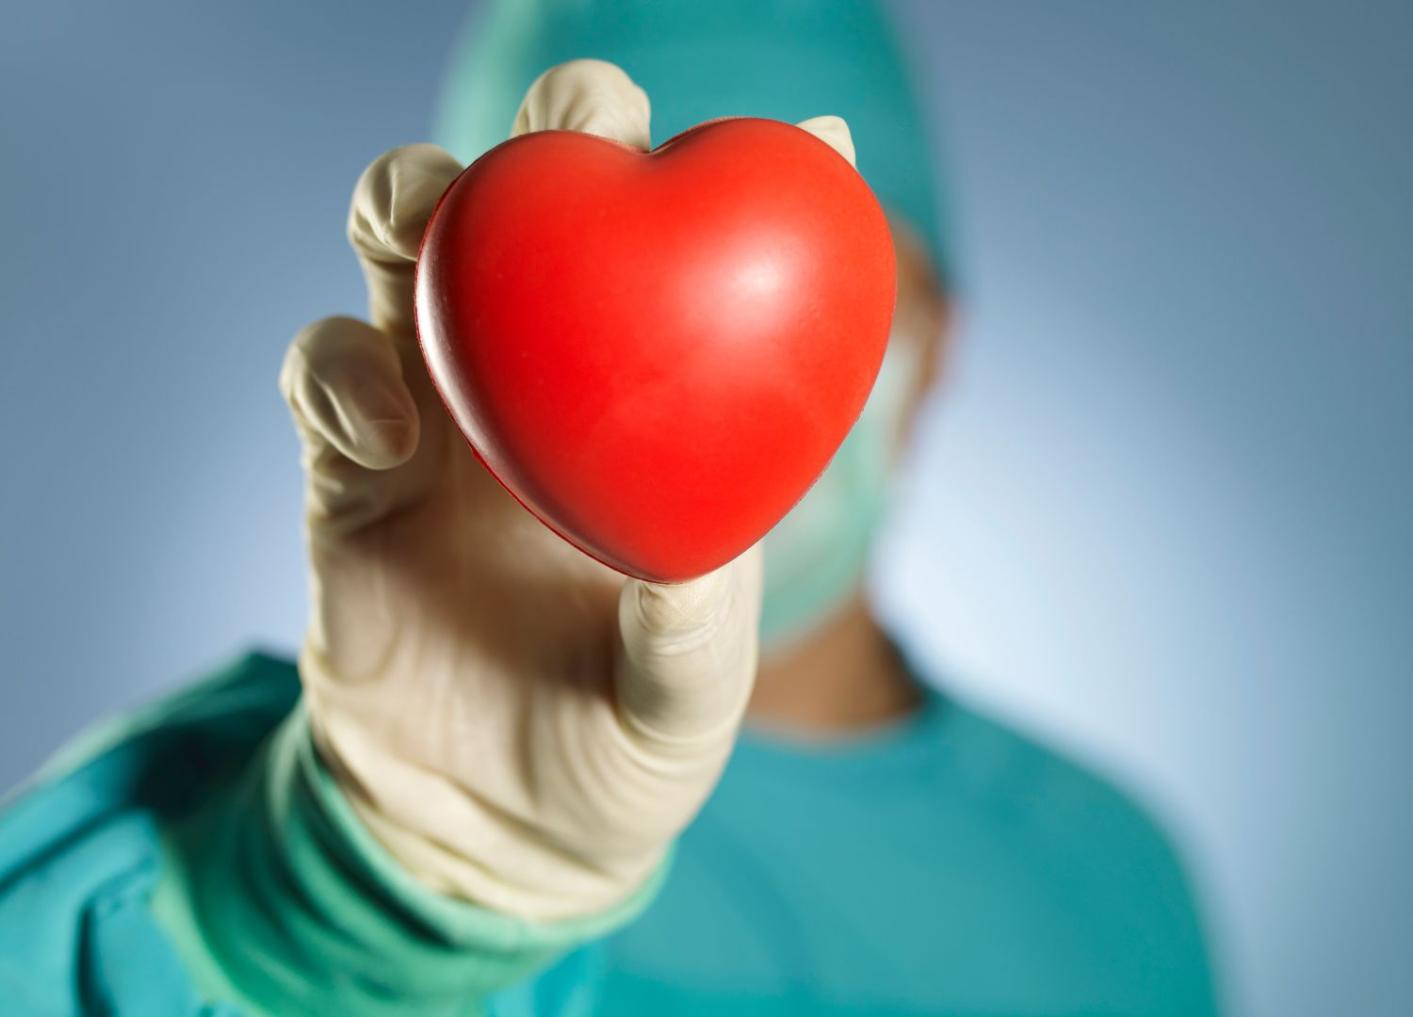 Heart Transplant Insurance: Is It Worth the Cost?